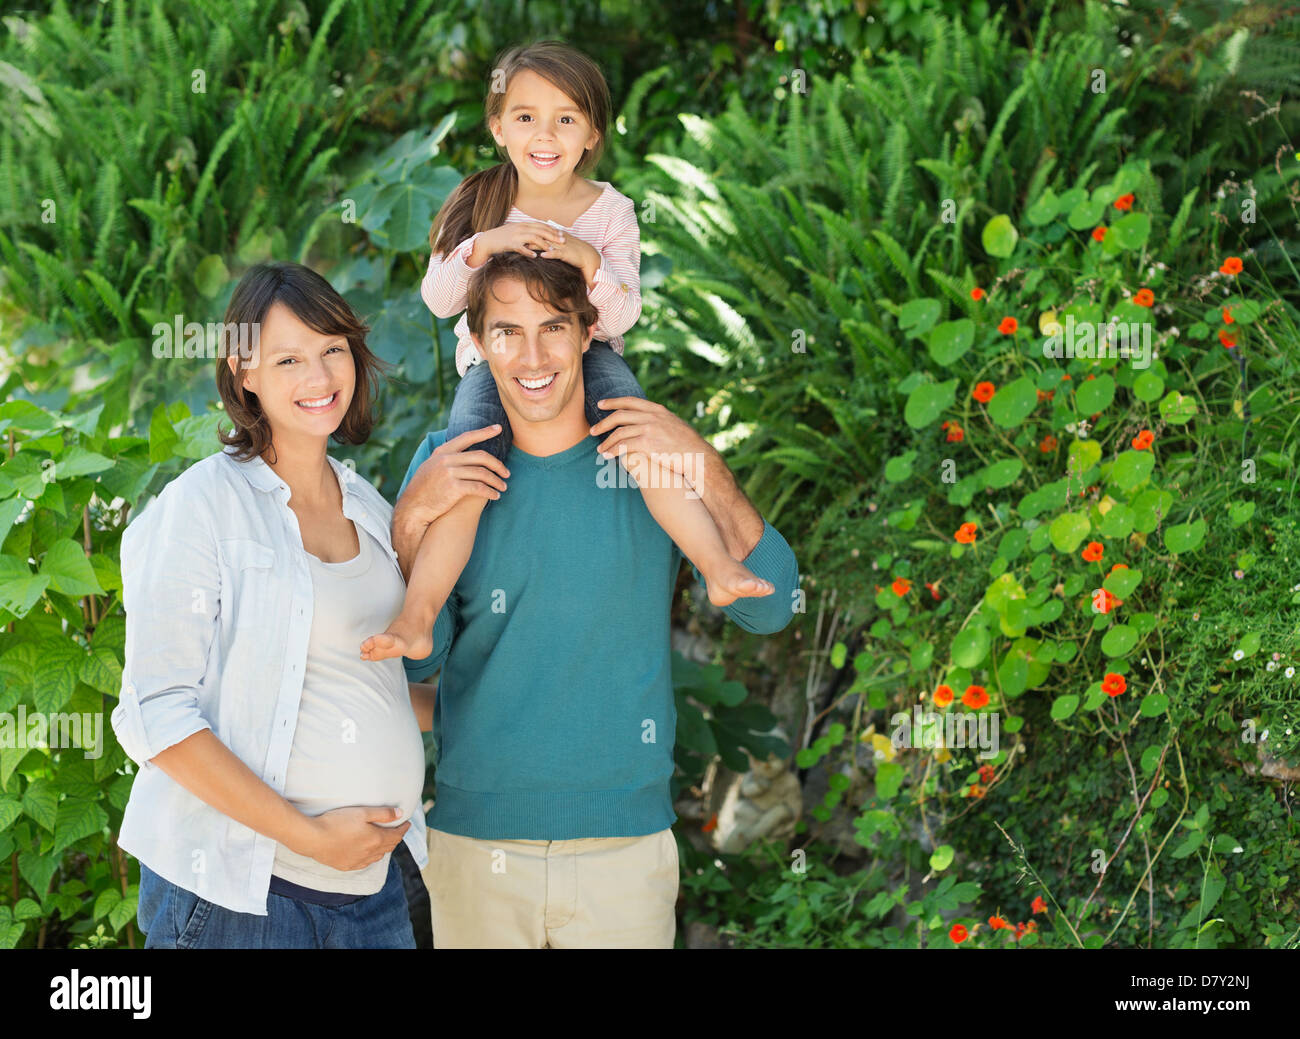 Family smiling together outdoors Stock Photo